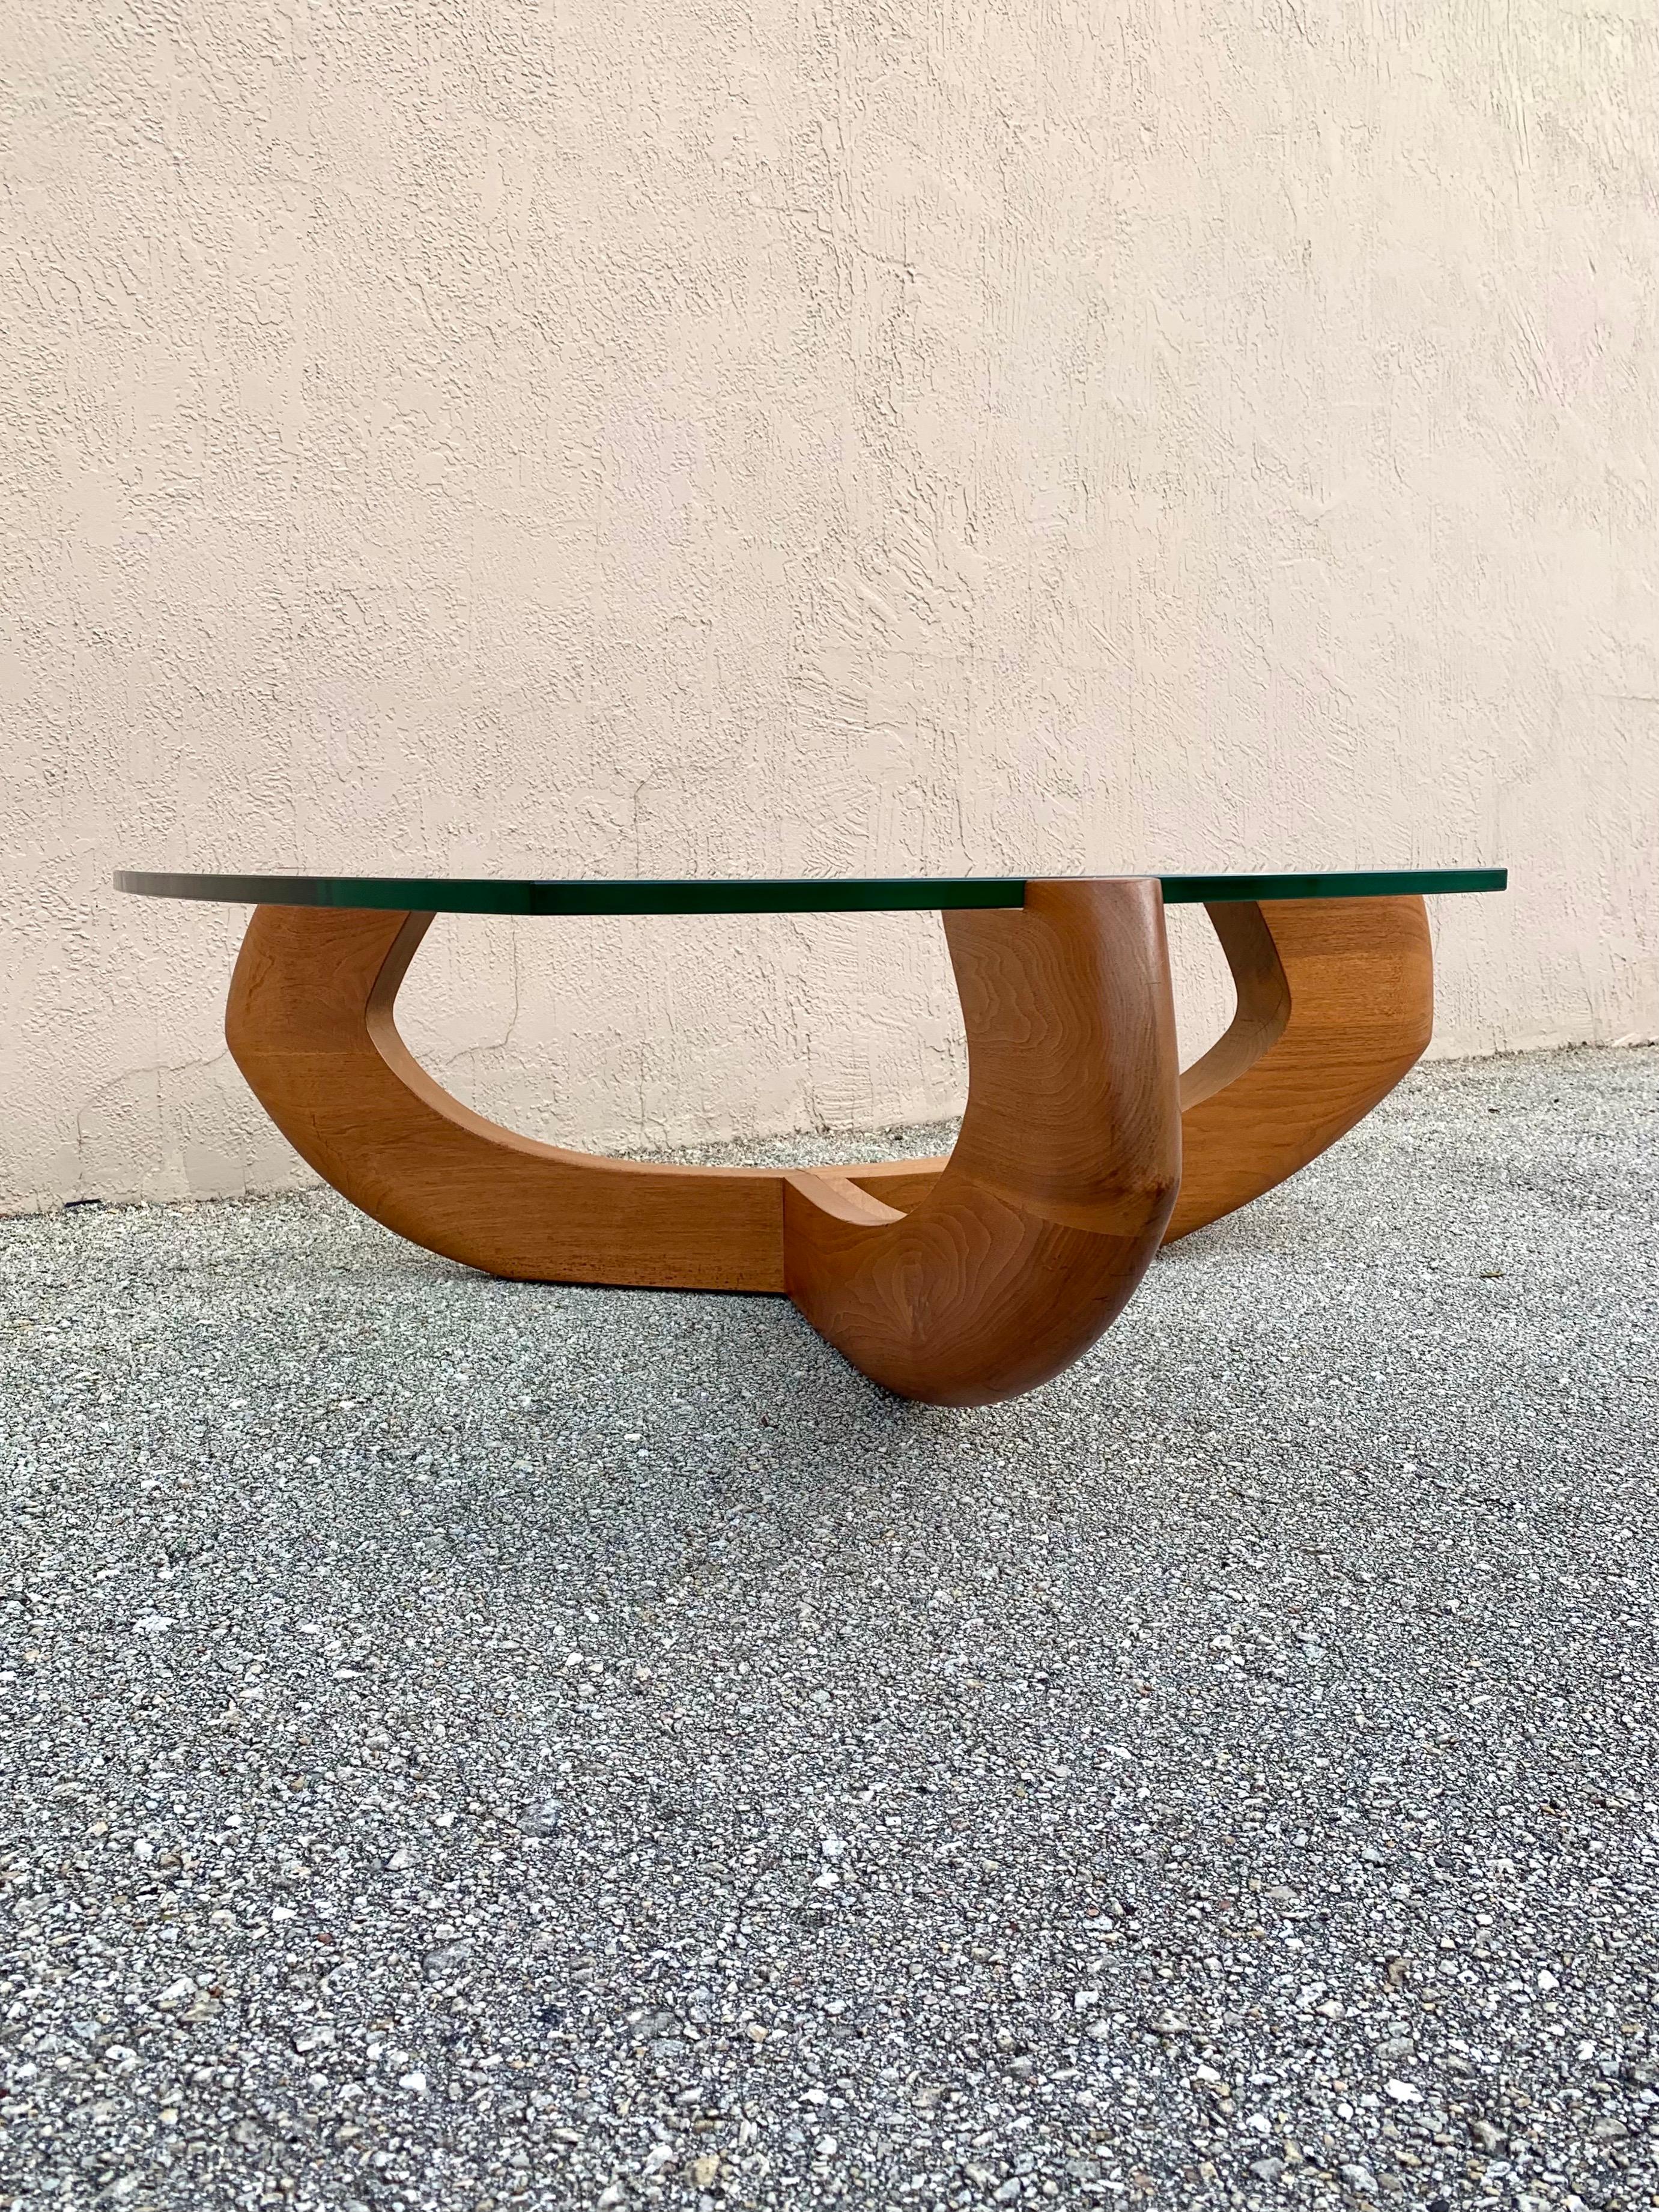 wood table with glass in the middle